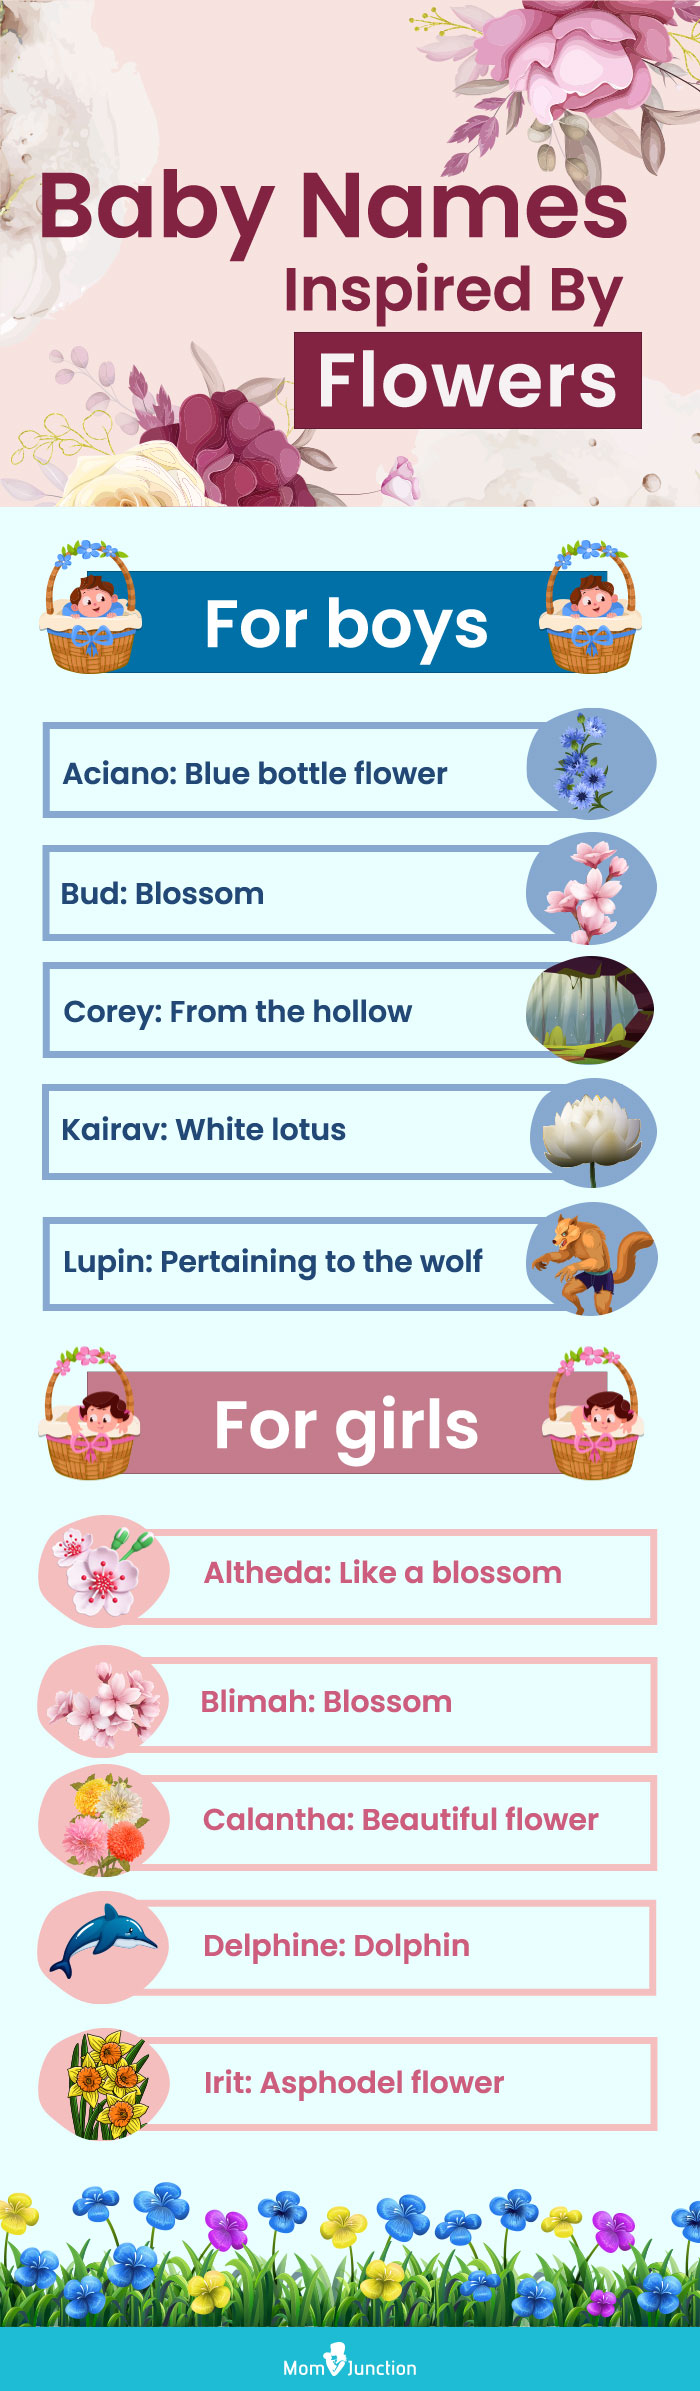 baby names inspired by flowers [infographic]